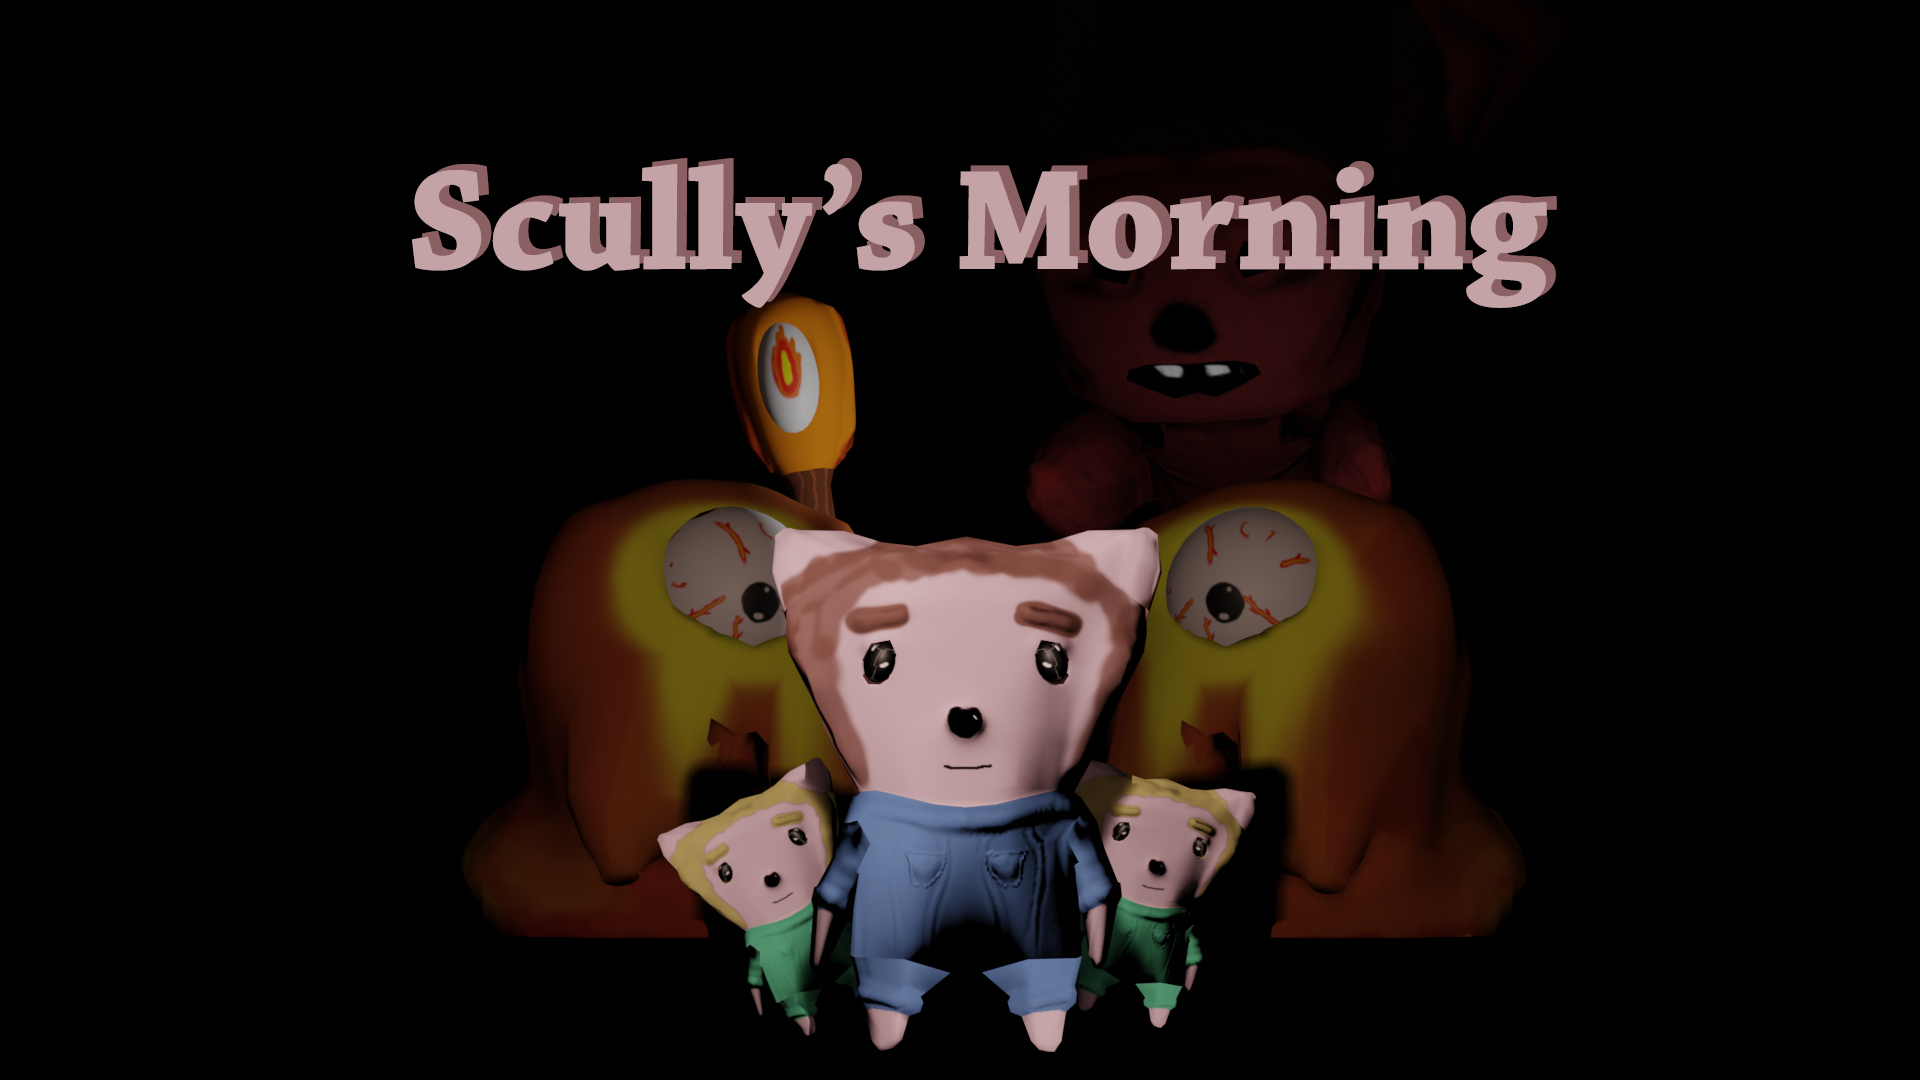 Scully's morning